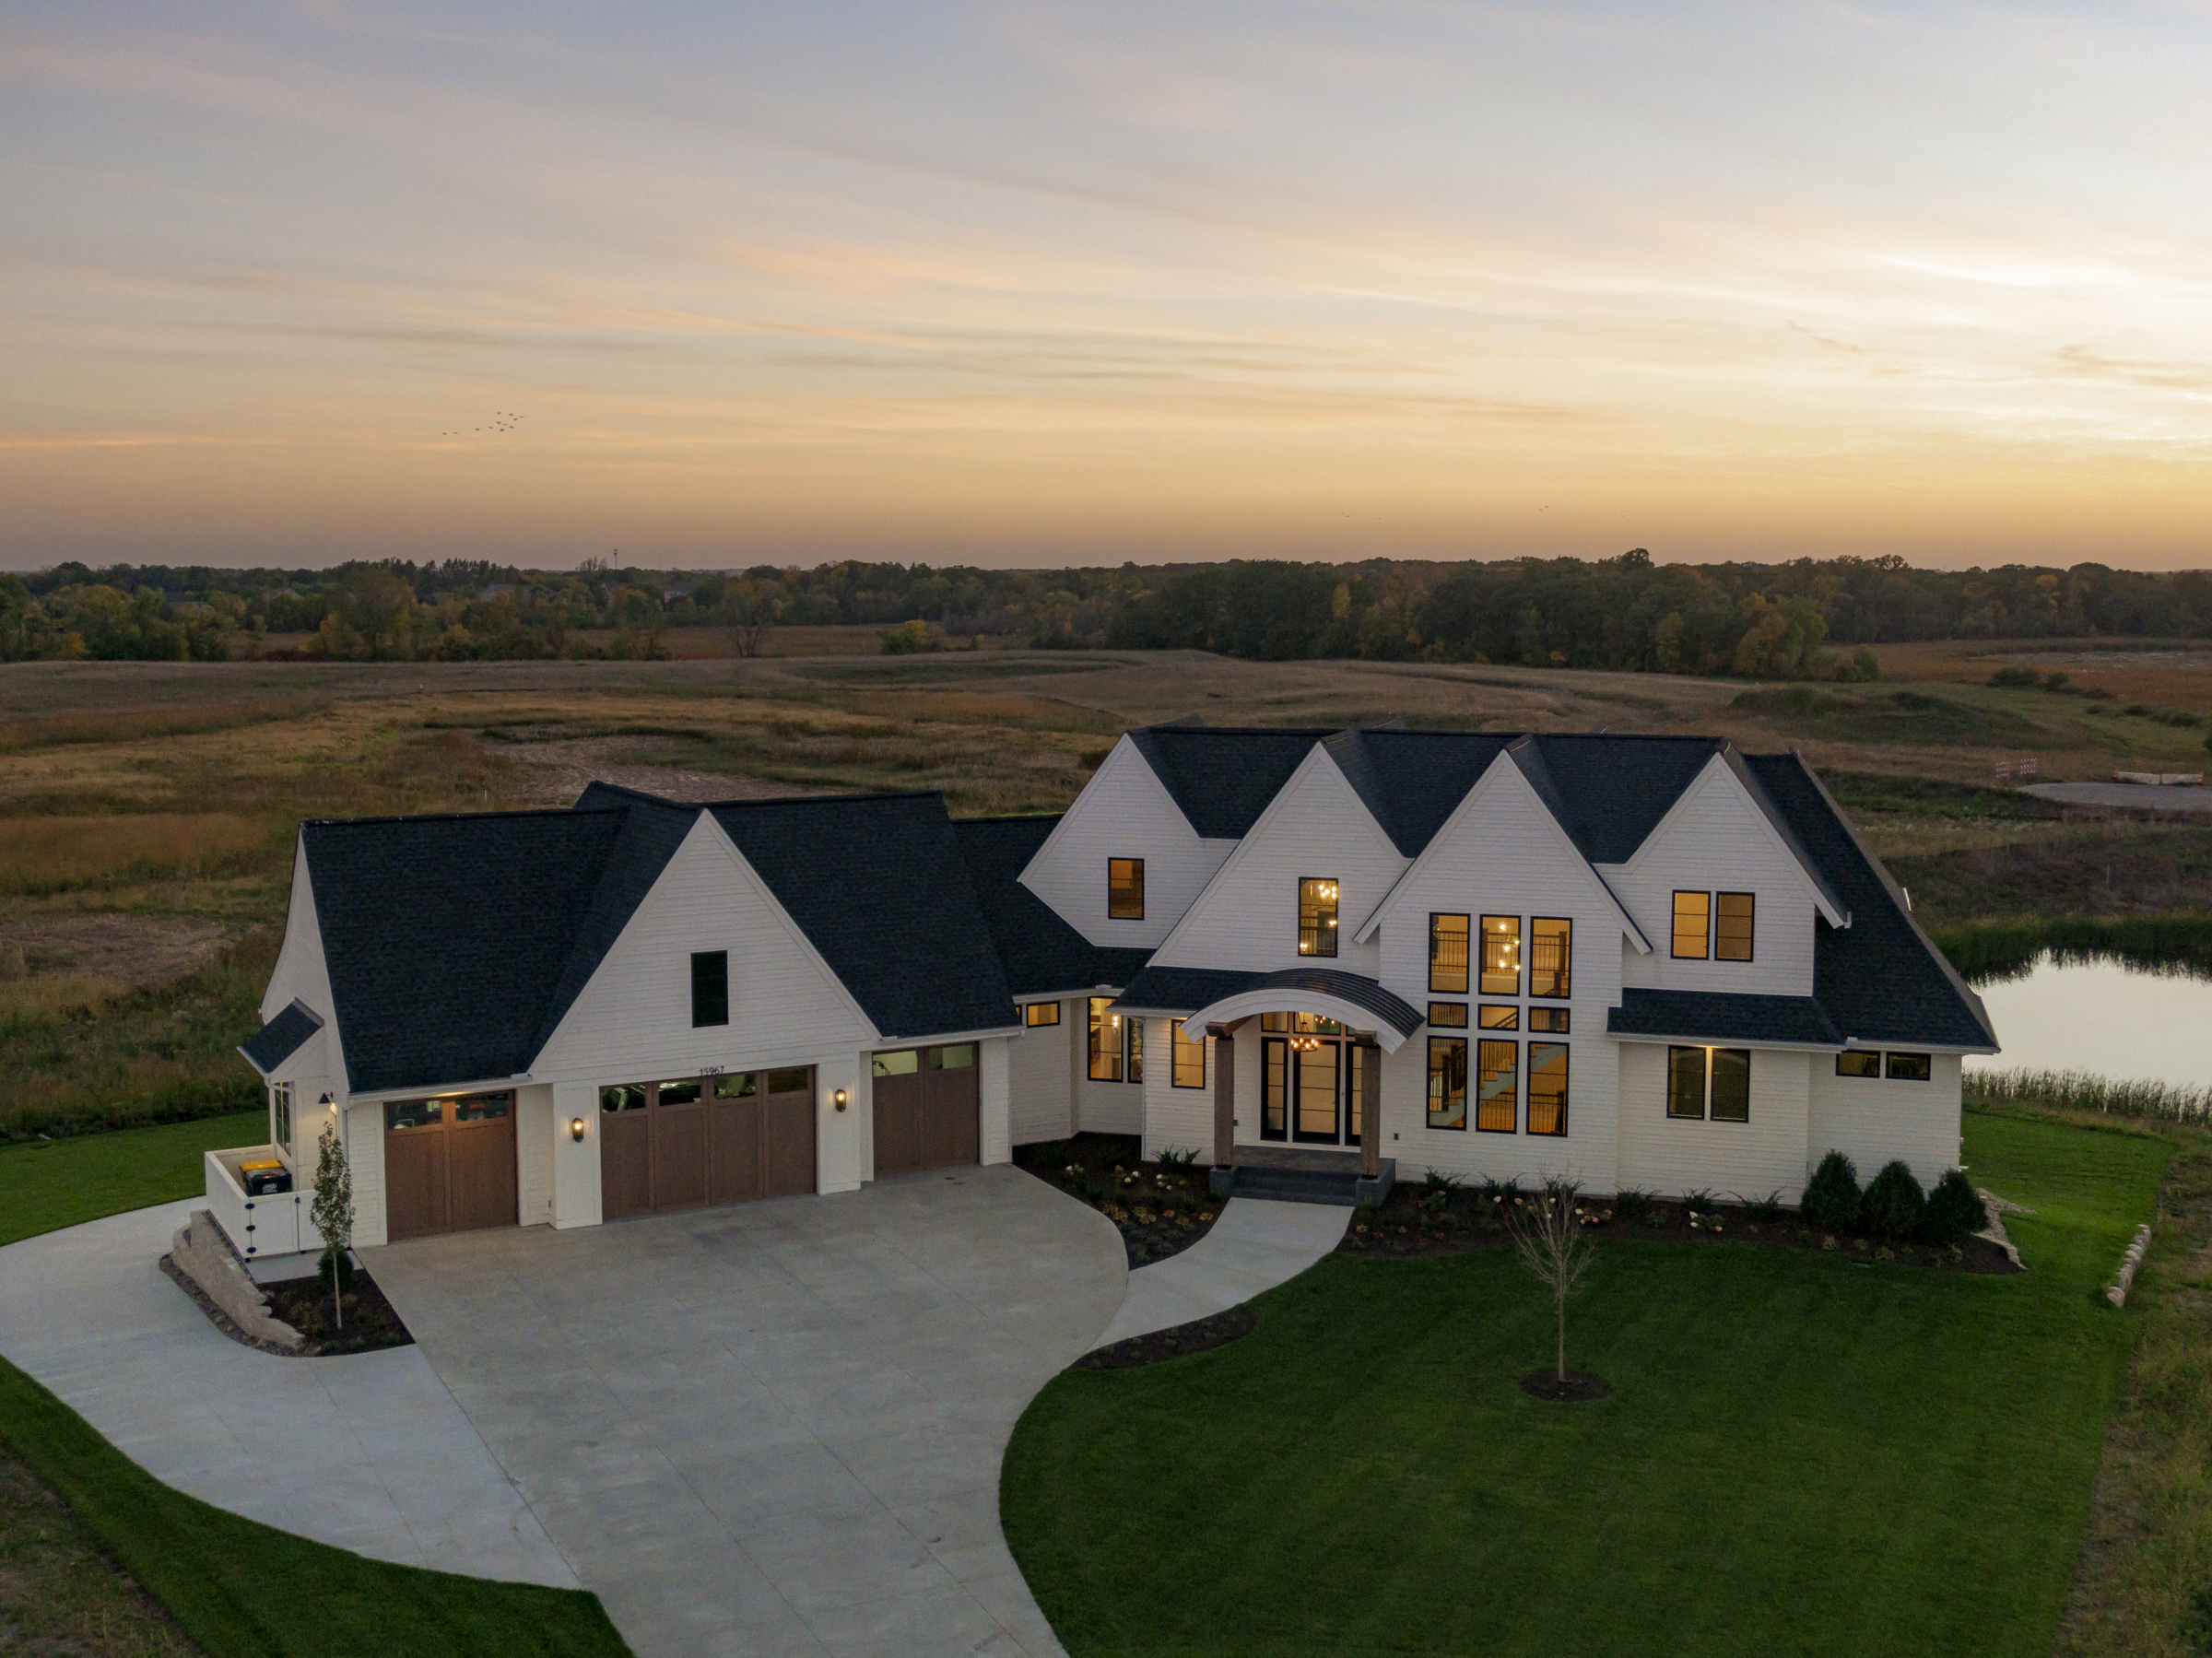 An aerial view of a prairie home in the countryside.